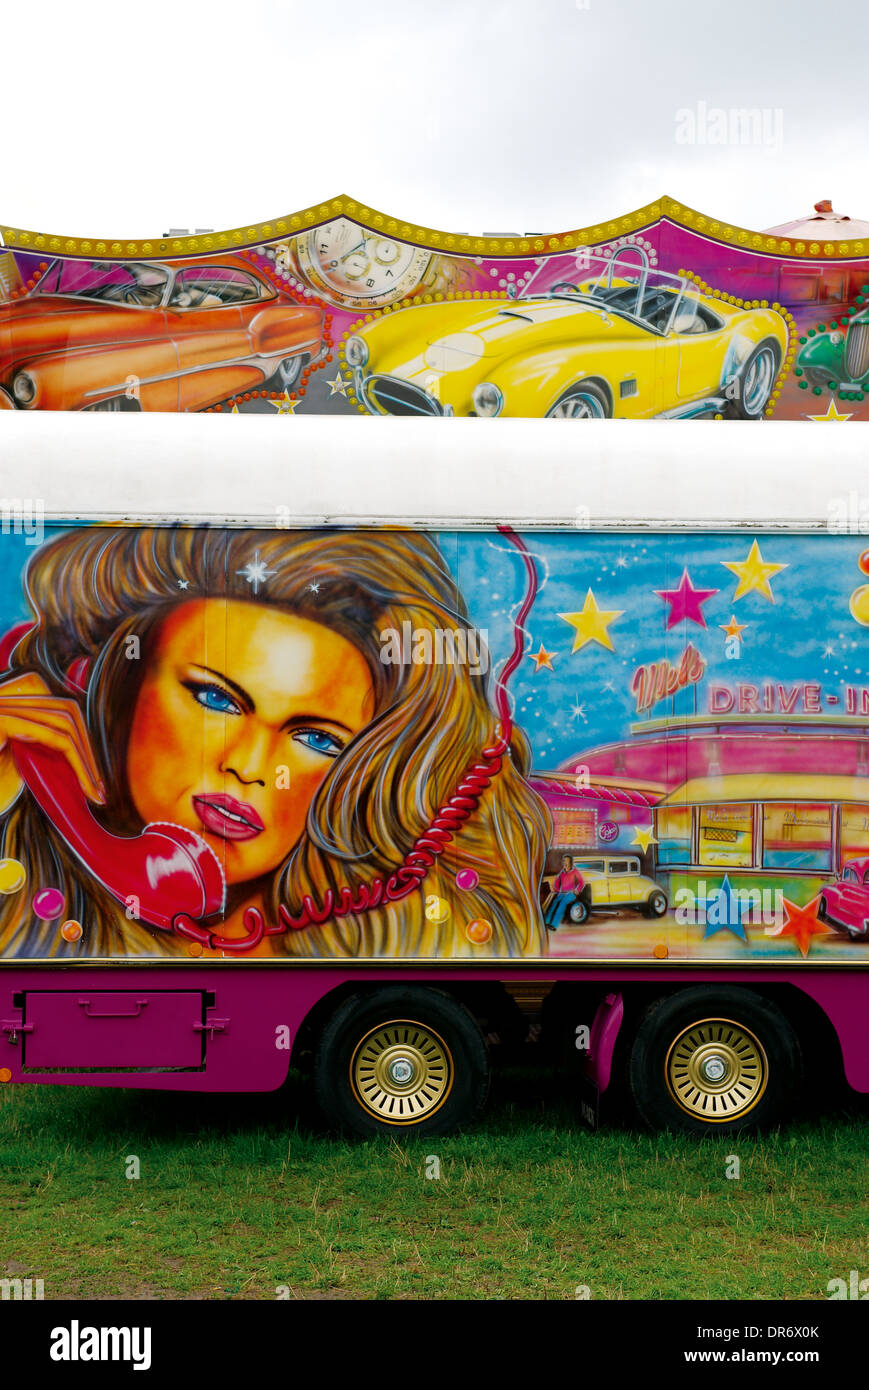 Part of colorful painted transport vehicle at fairground Stock Photo